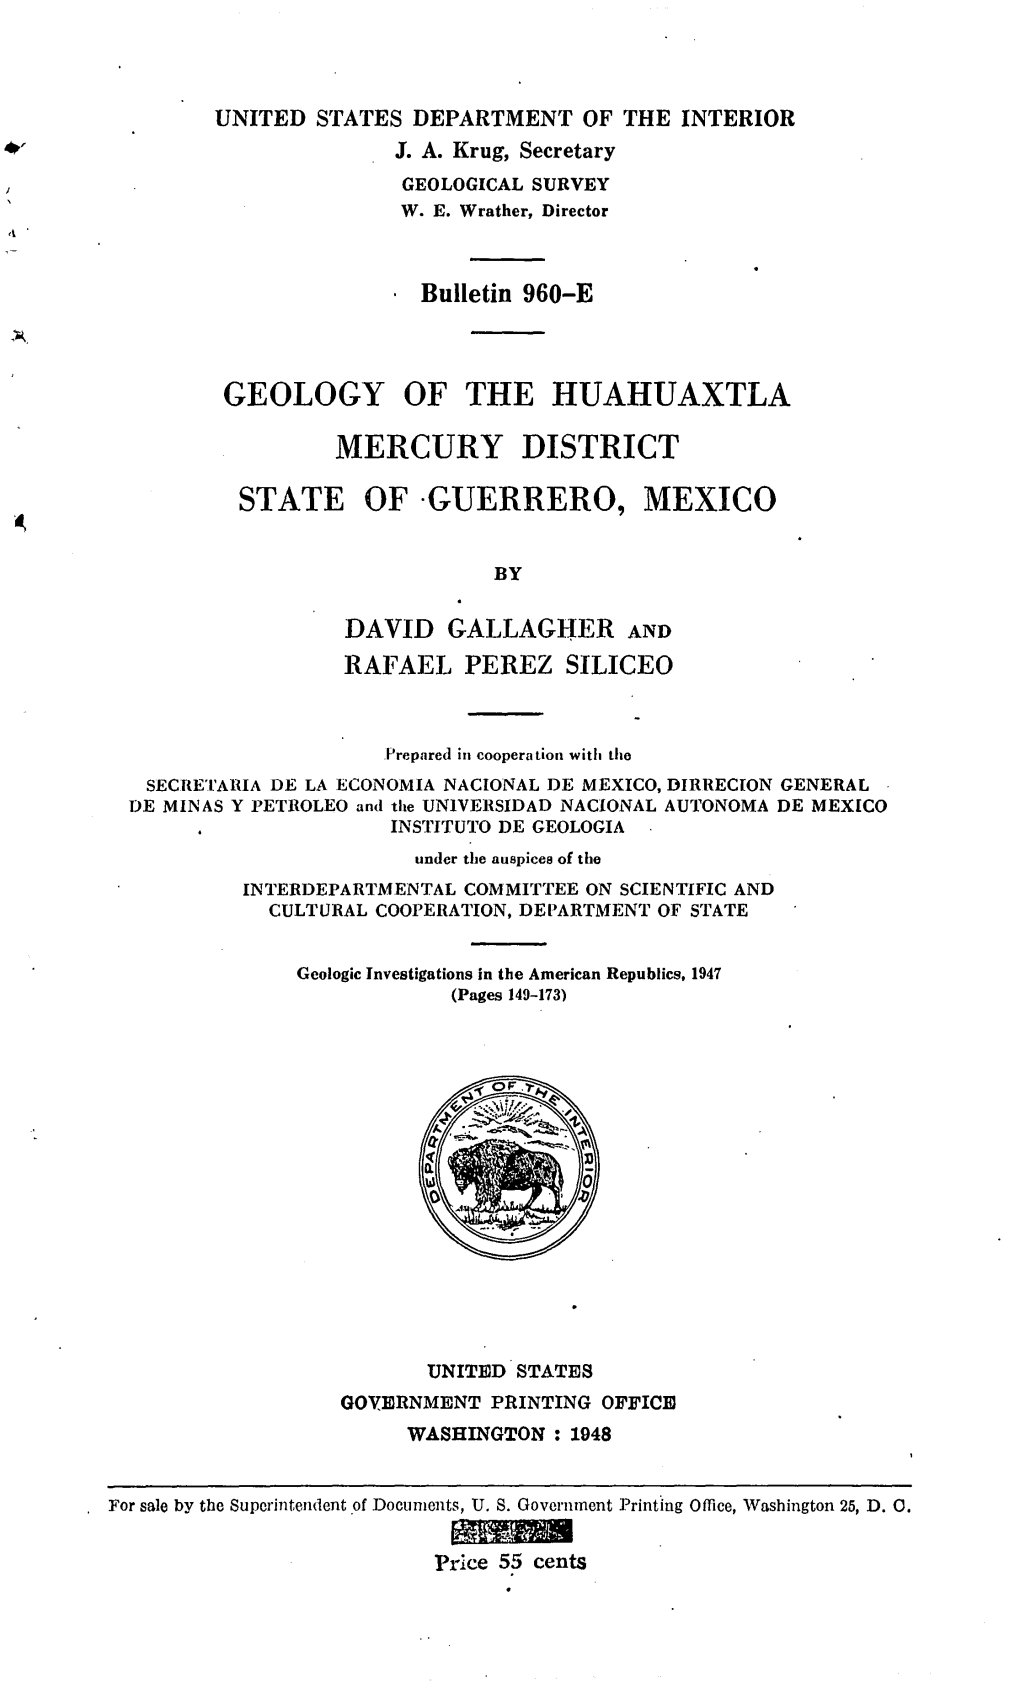 Geology of the Huahuaxtla Mercury District State of Guerrero, Mexico